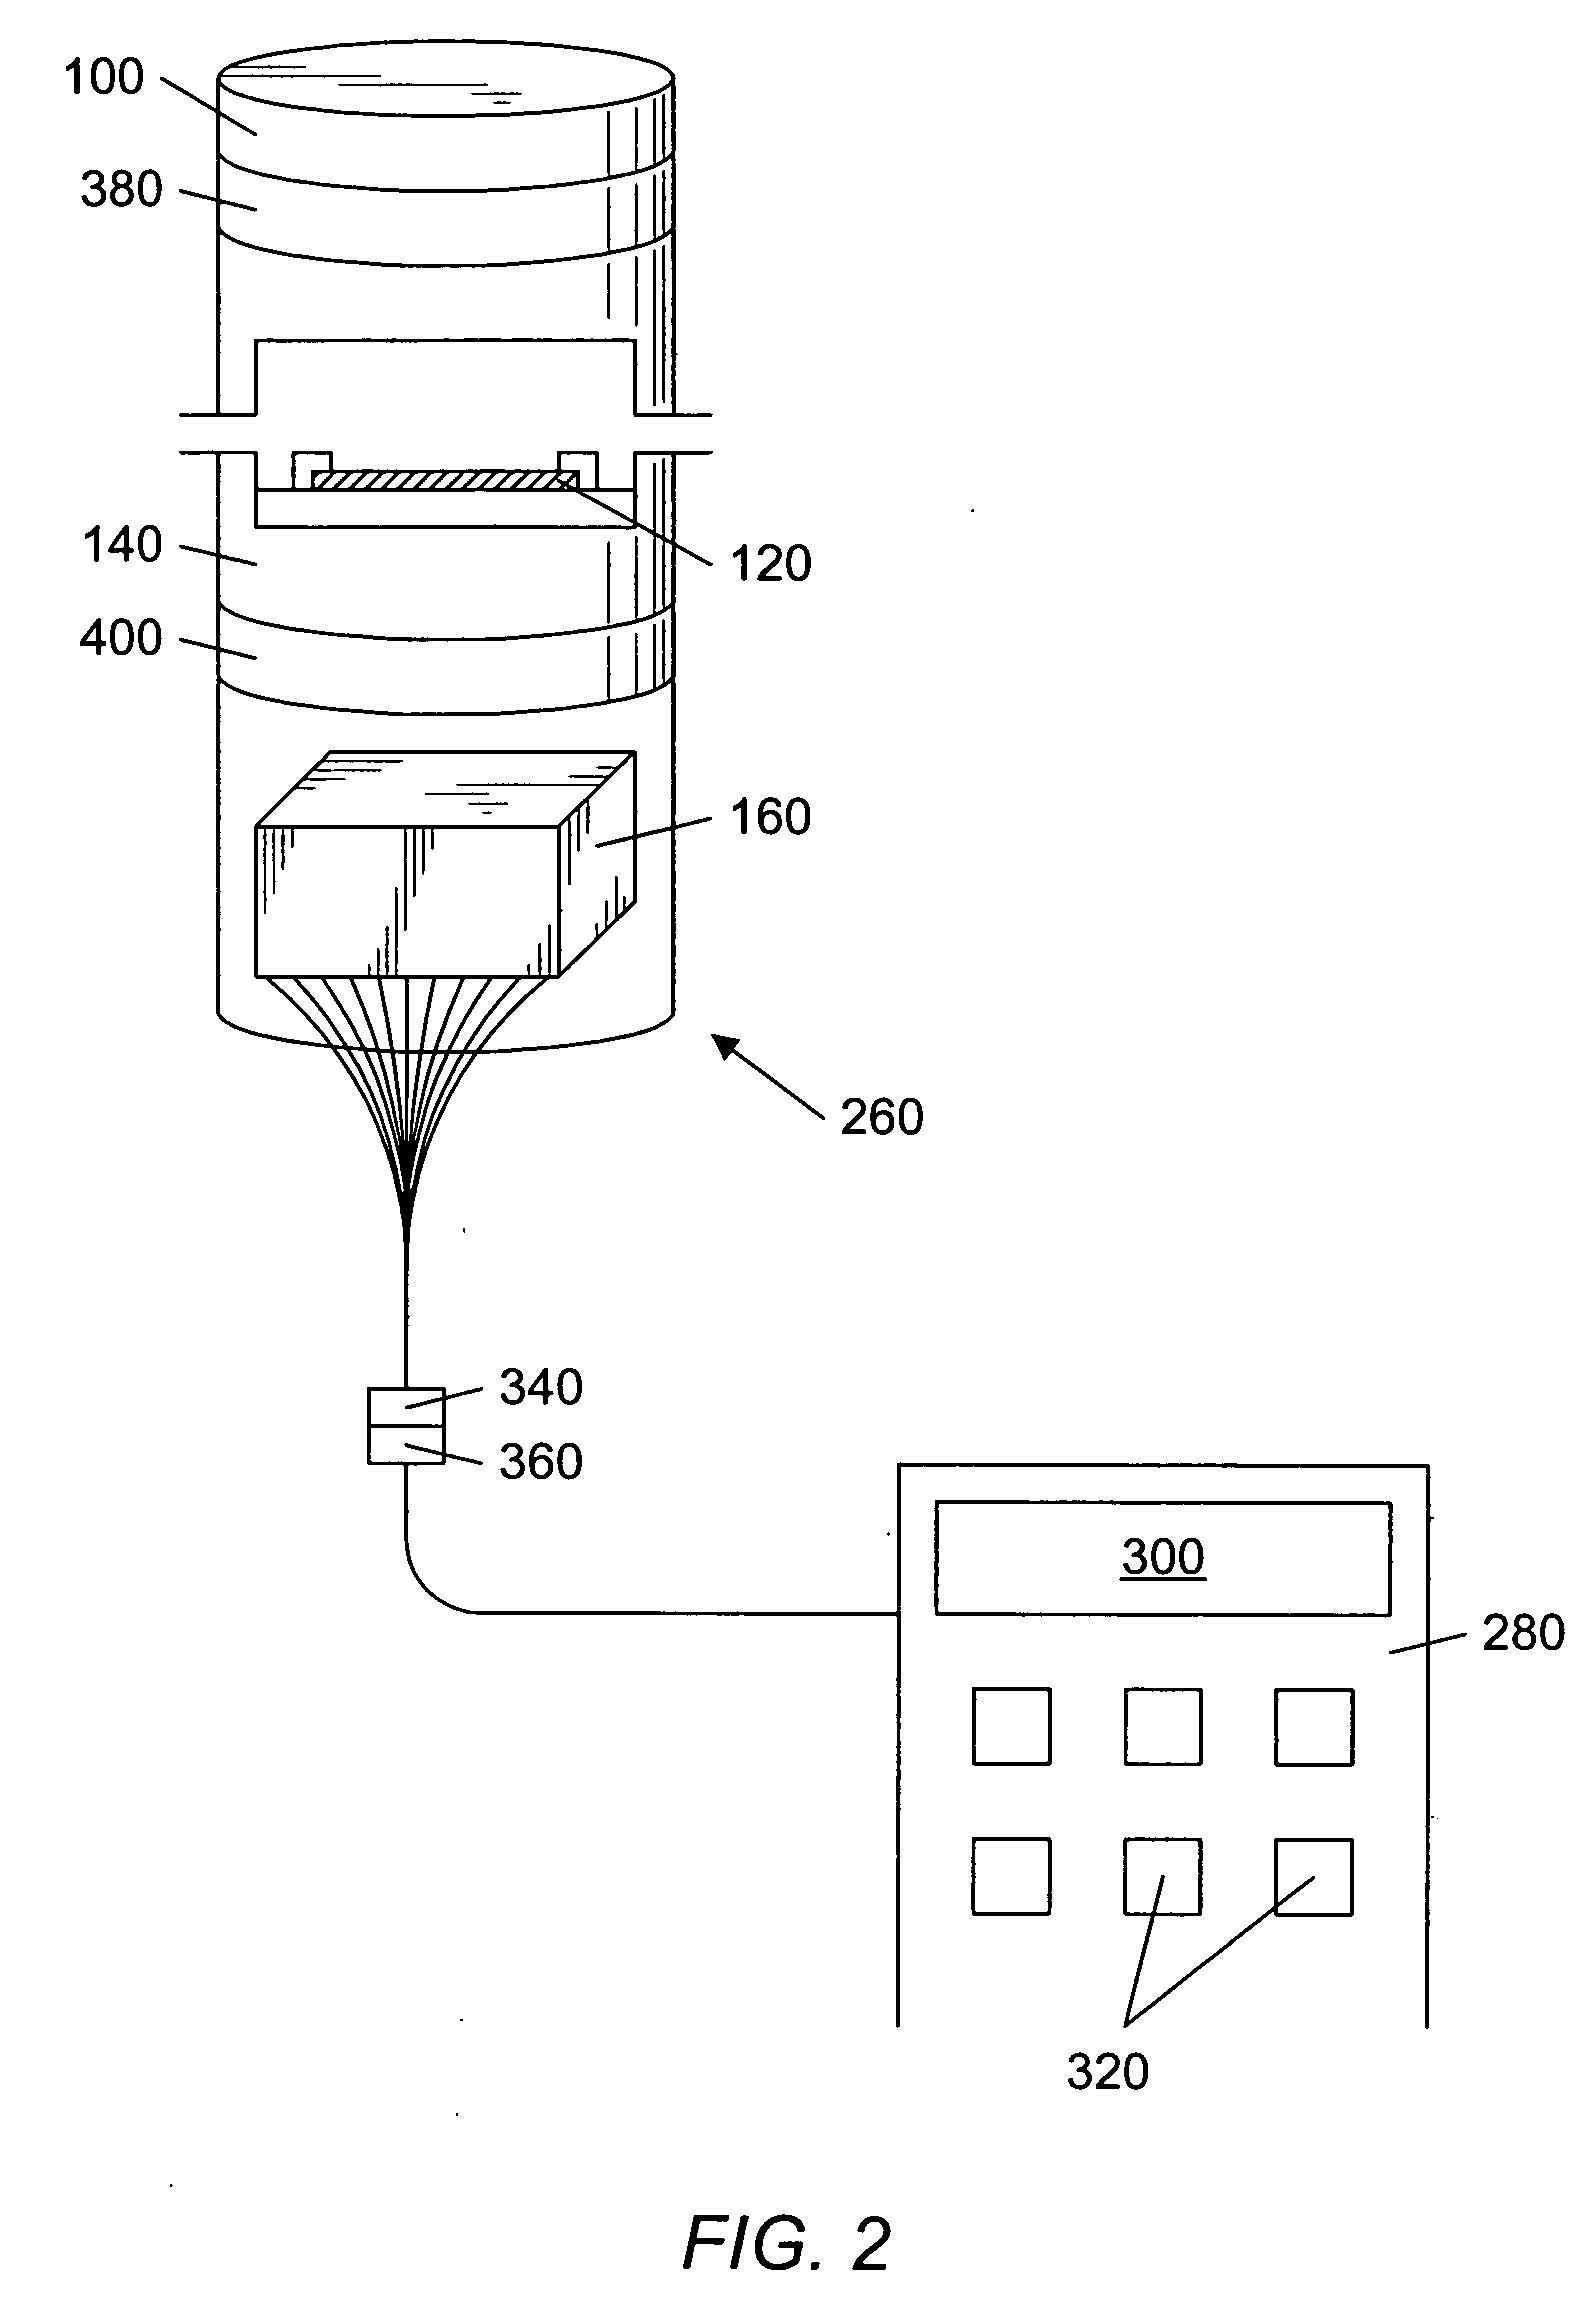 Method and system for the analysis of saliva using a sensor array